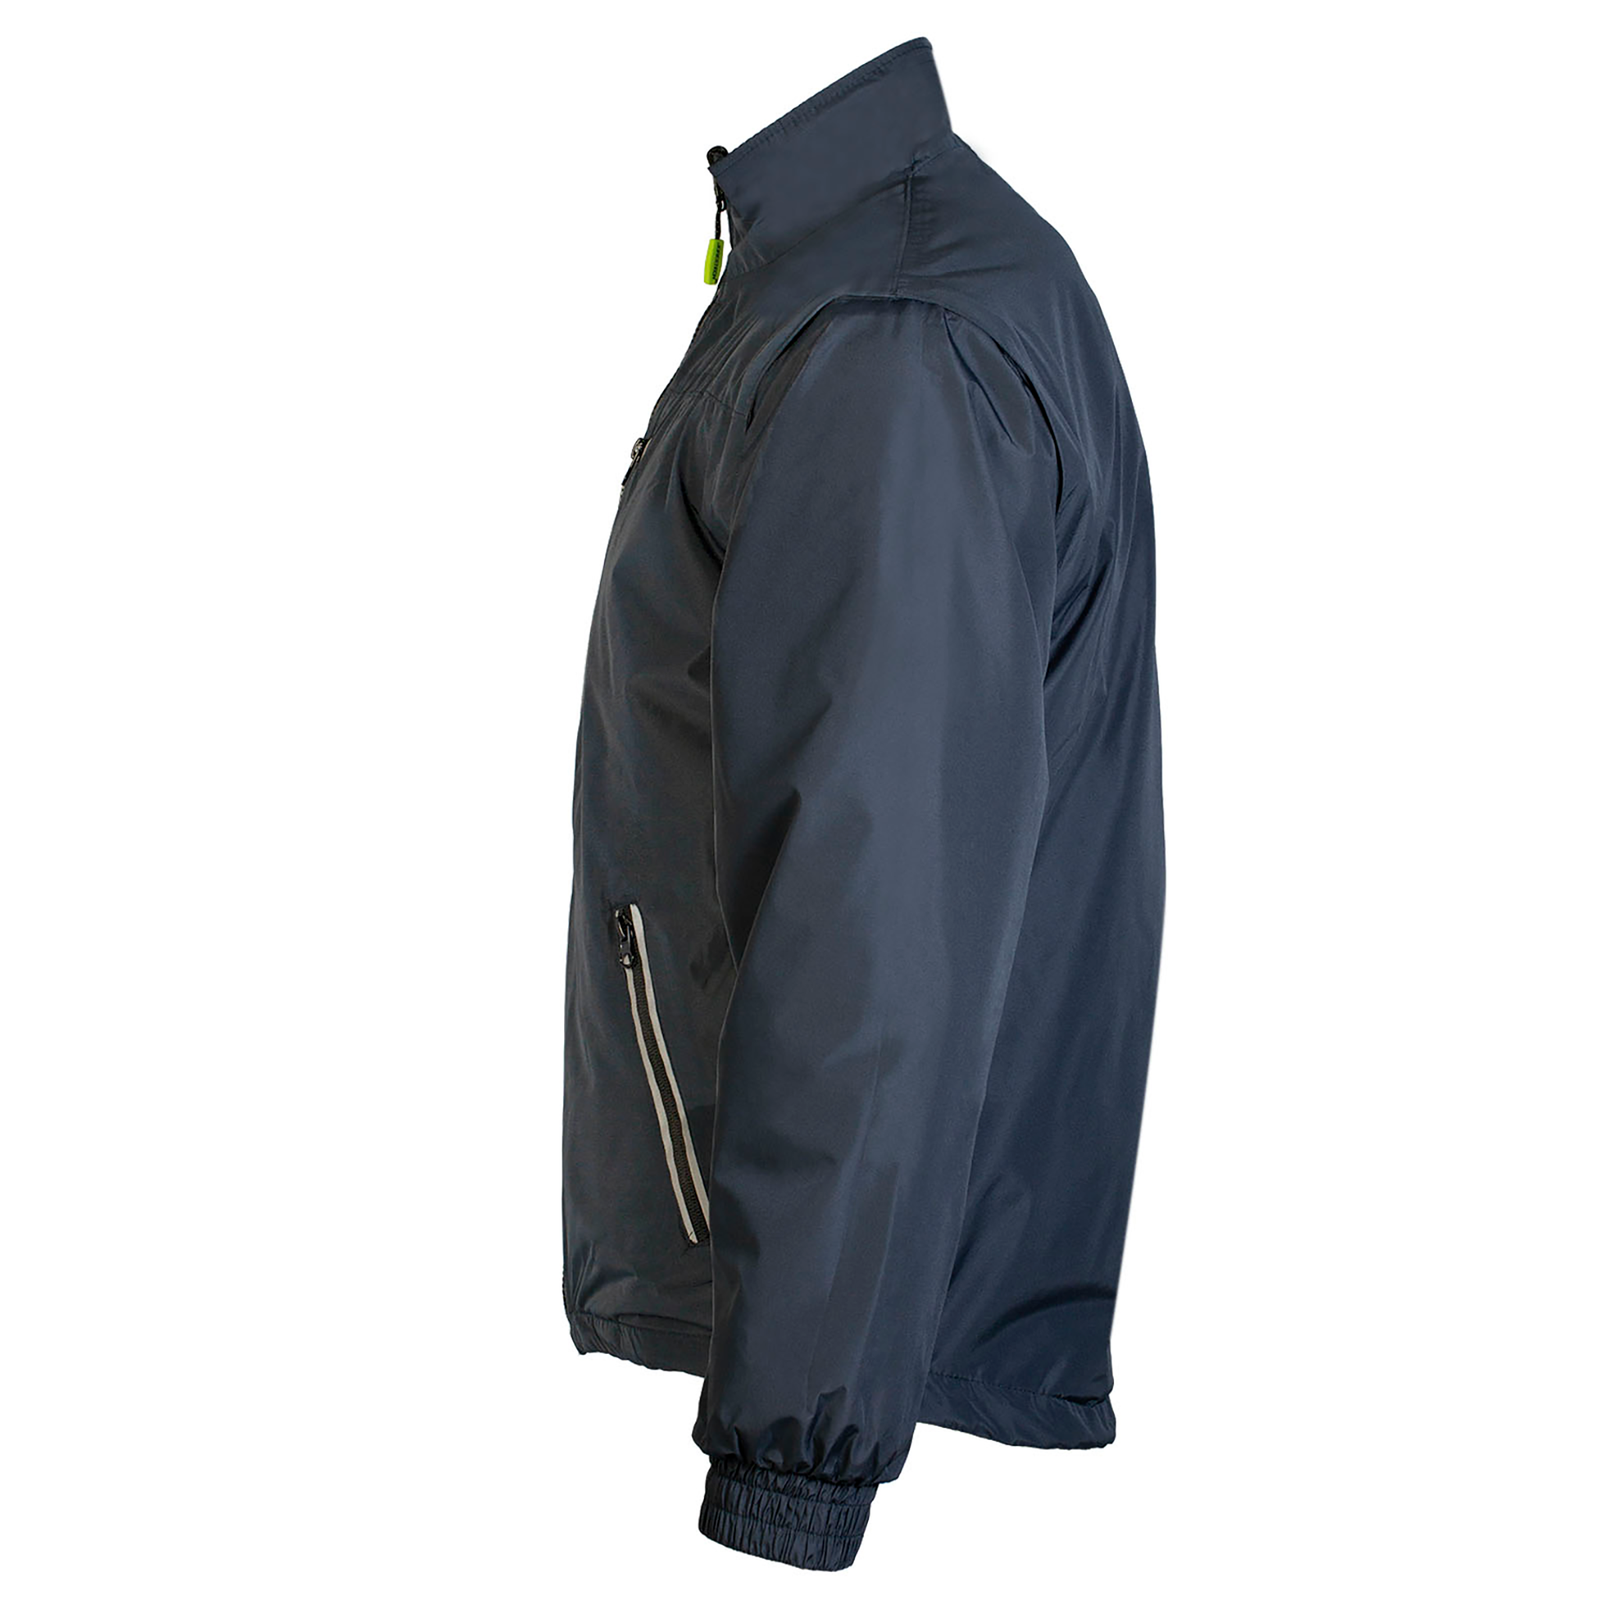 Side view of the 4 in 1 hi-vis reversible JORESTECH safety jacket with removable sleeves. Shows the non reflective dark gray side of the jacket